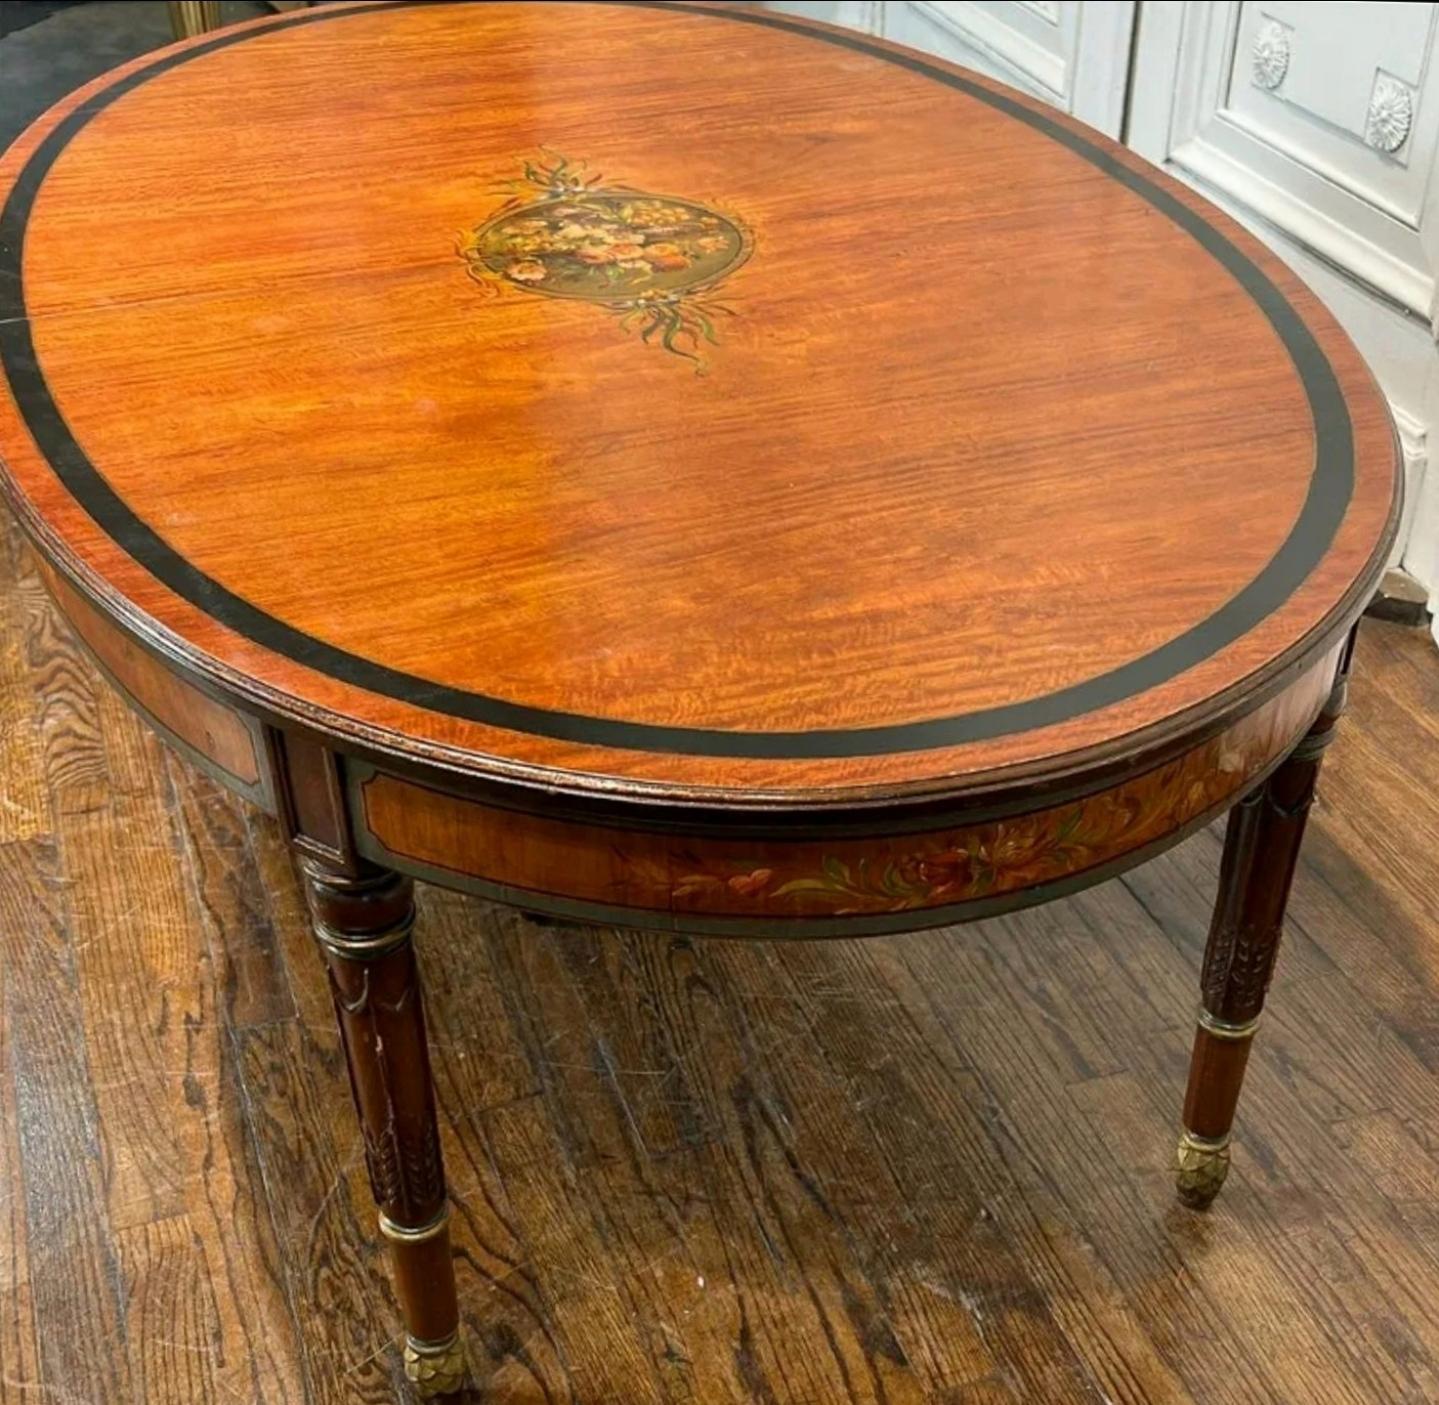 20th Century English Edwardian Period Adam Style Cocktail Table For Sale